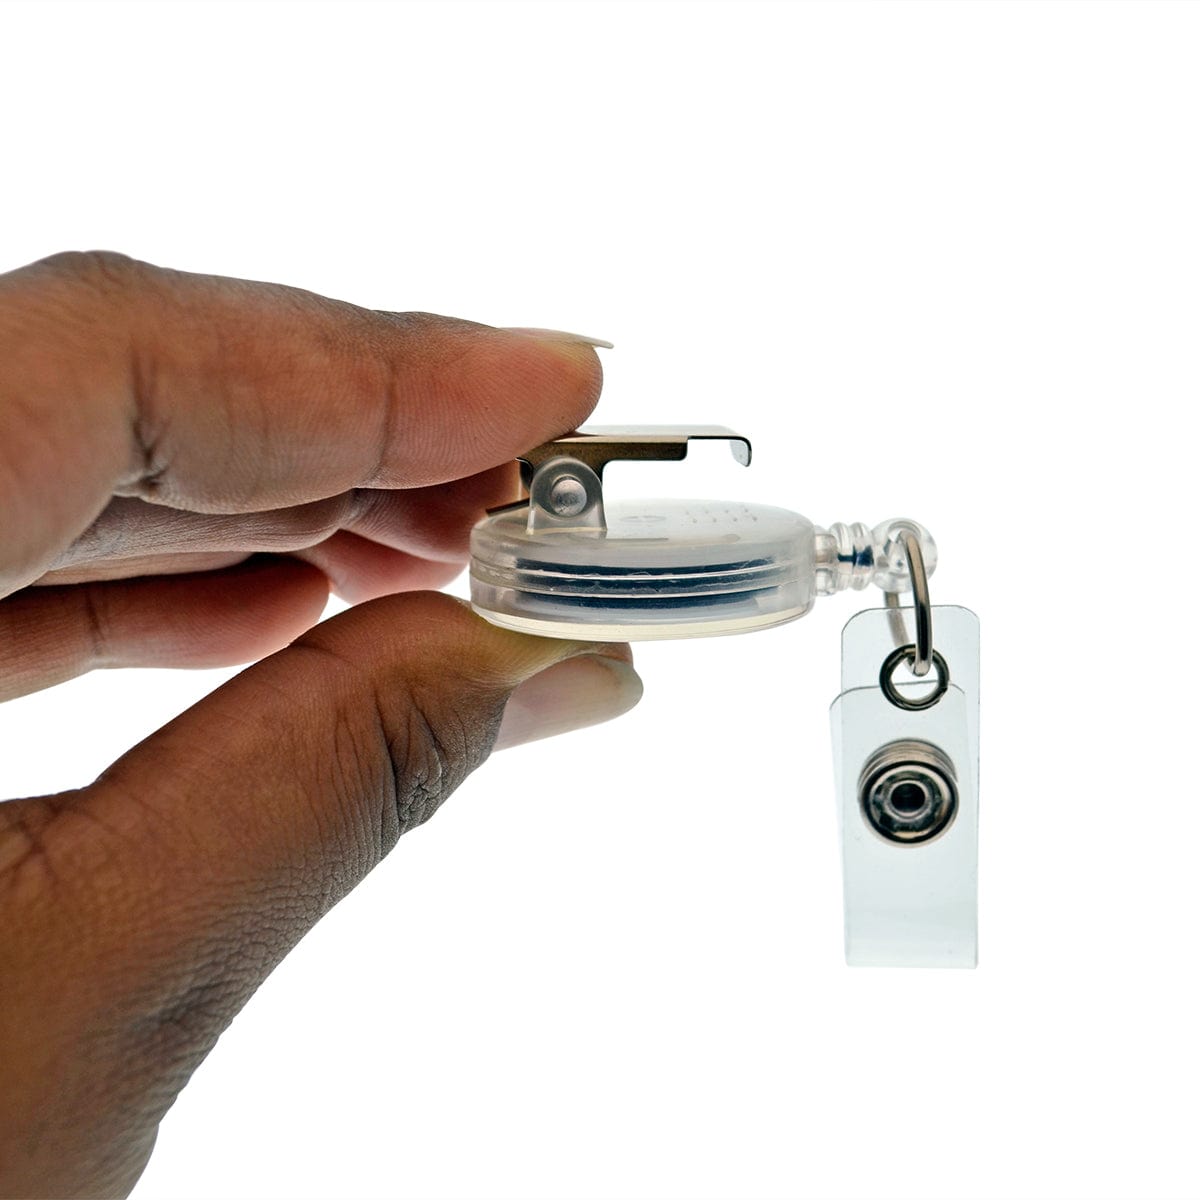 Translucent Retractable Badge Reel with Non-Swivel Spring Clip (P/N  2120-473X) - Translucent White (clear)